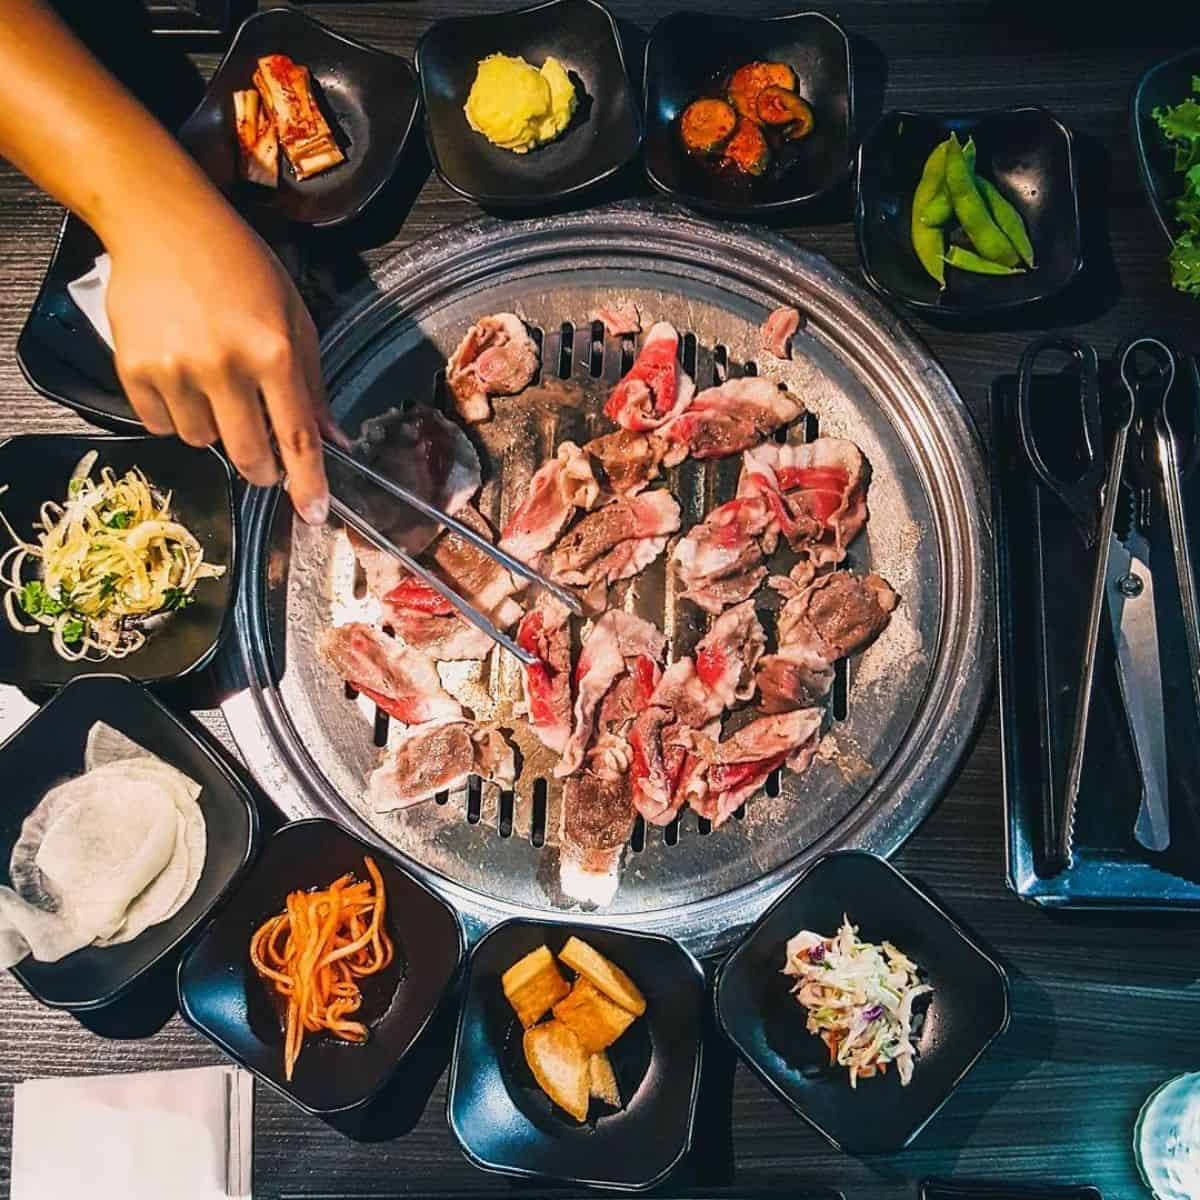 Birds eye view of Korean BBQ with side dishes